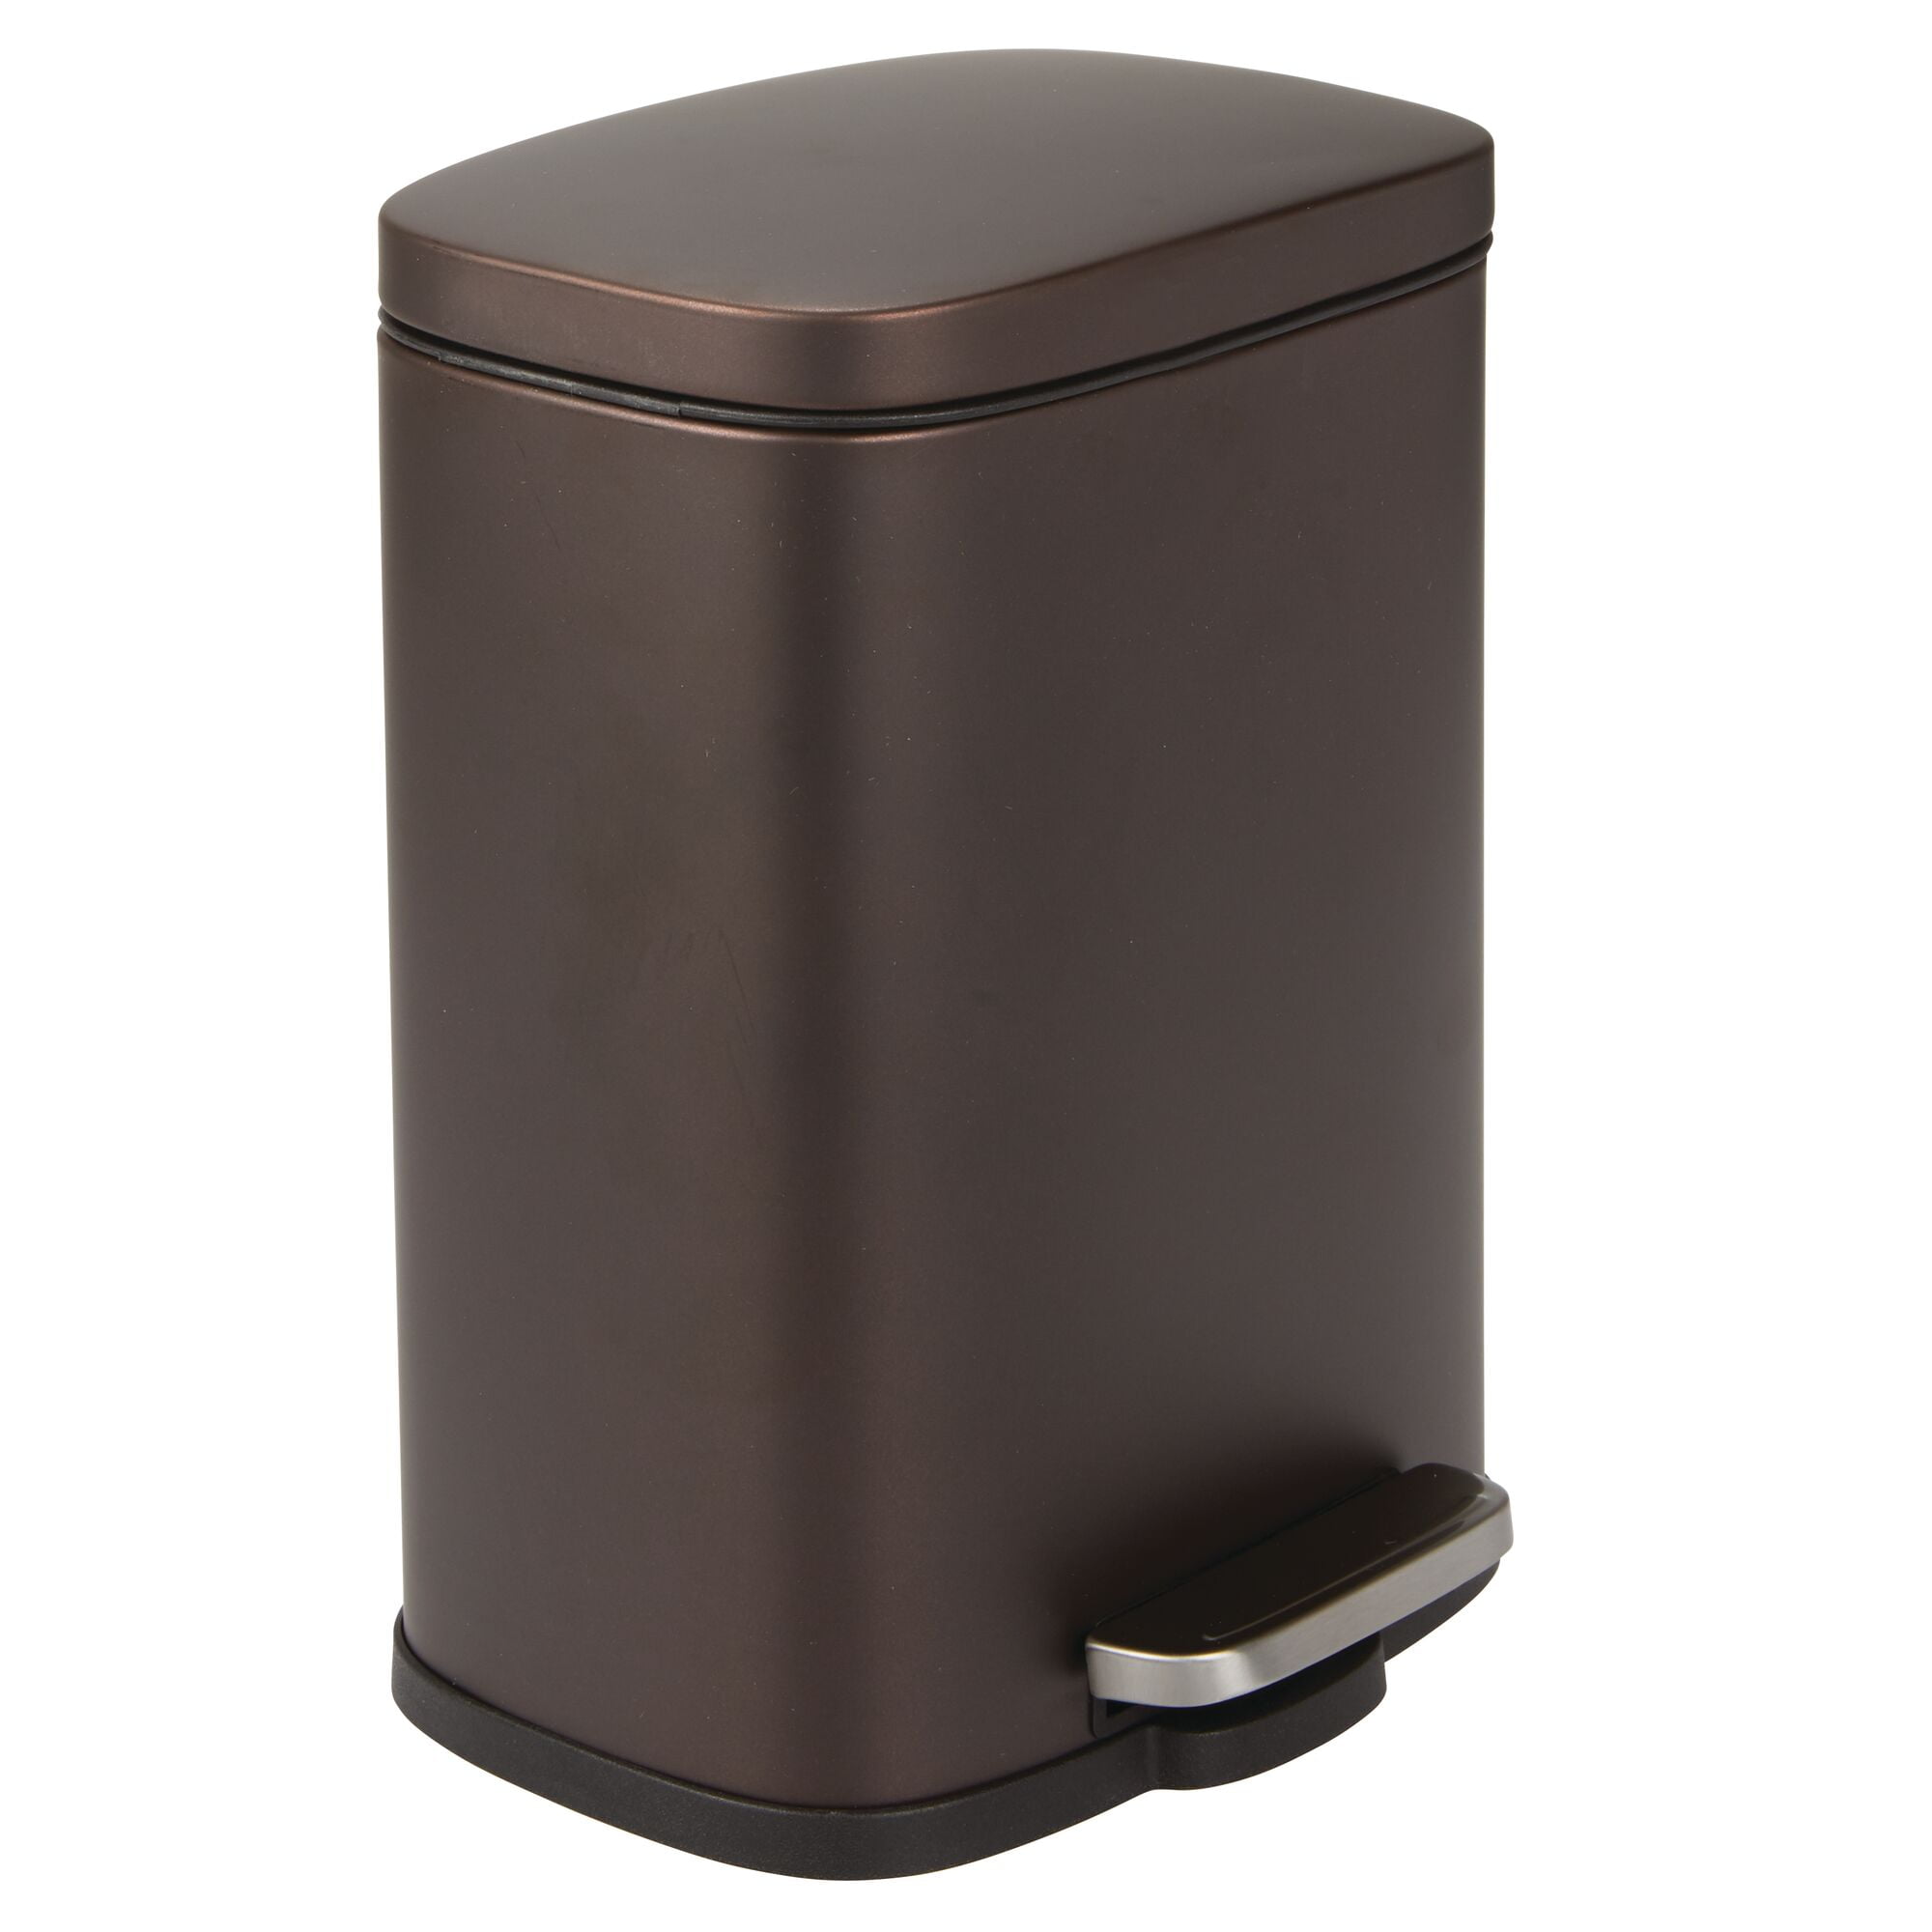 Details about   Slim 2.5-gallon Step on Space Savor Trash Can with Lid By Superio. Beige Color 